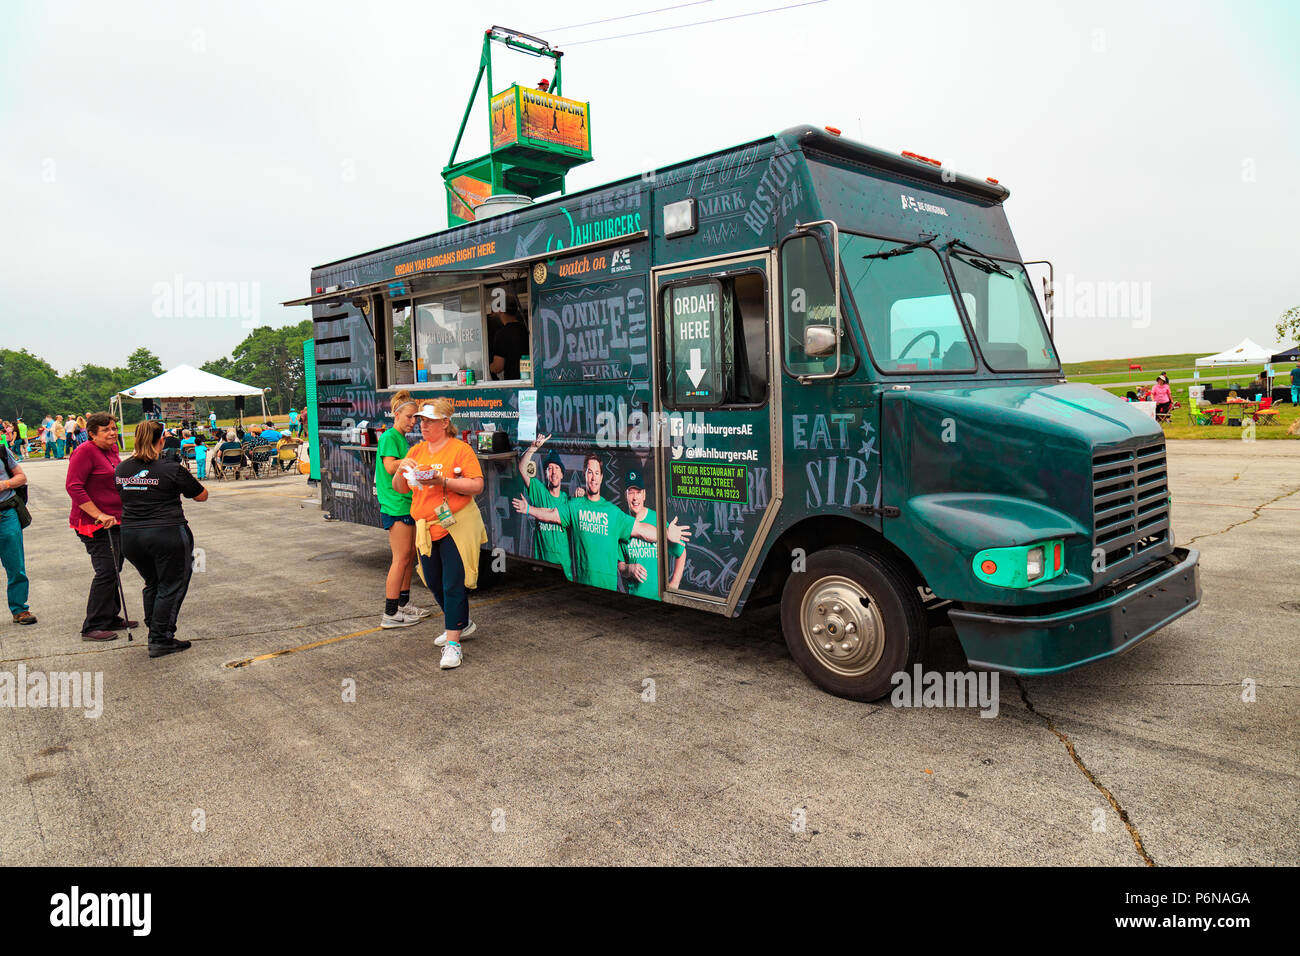 Avondale Pa Usa June 24 2018 A Food Truck At The Annual